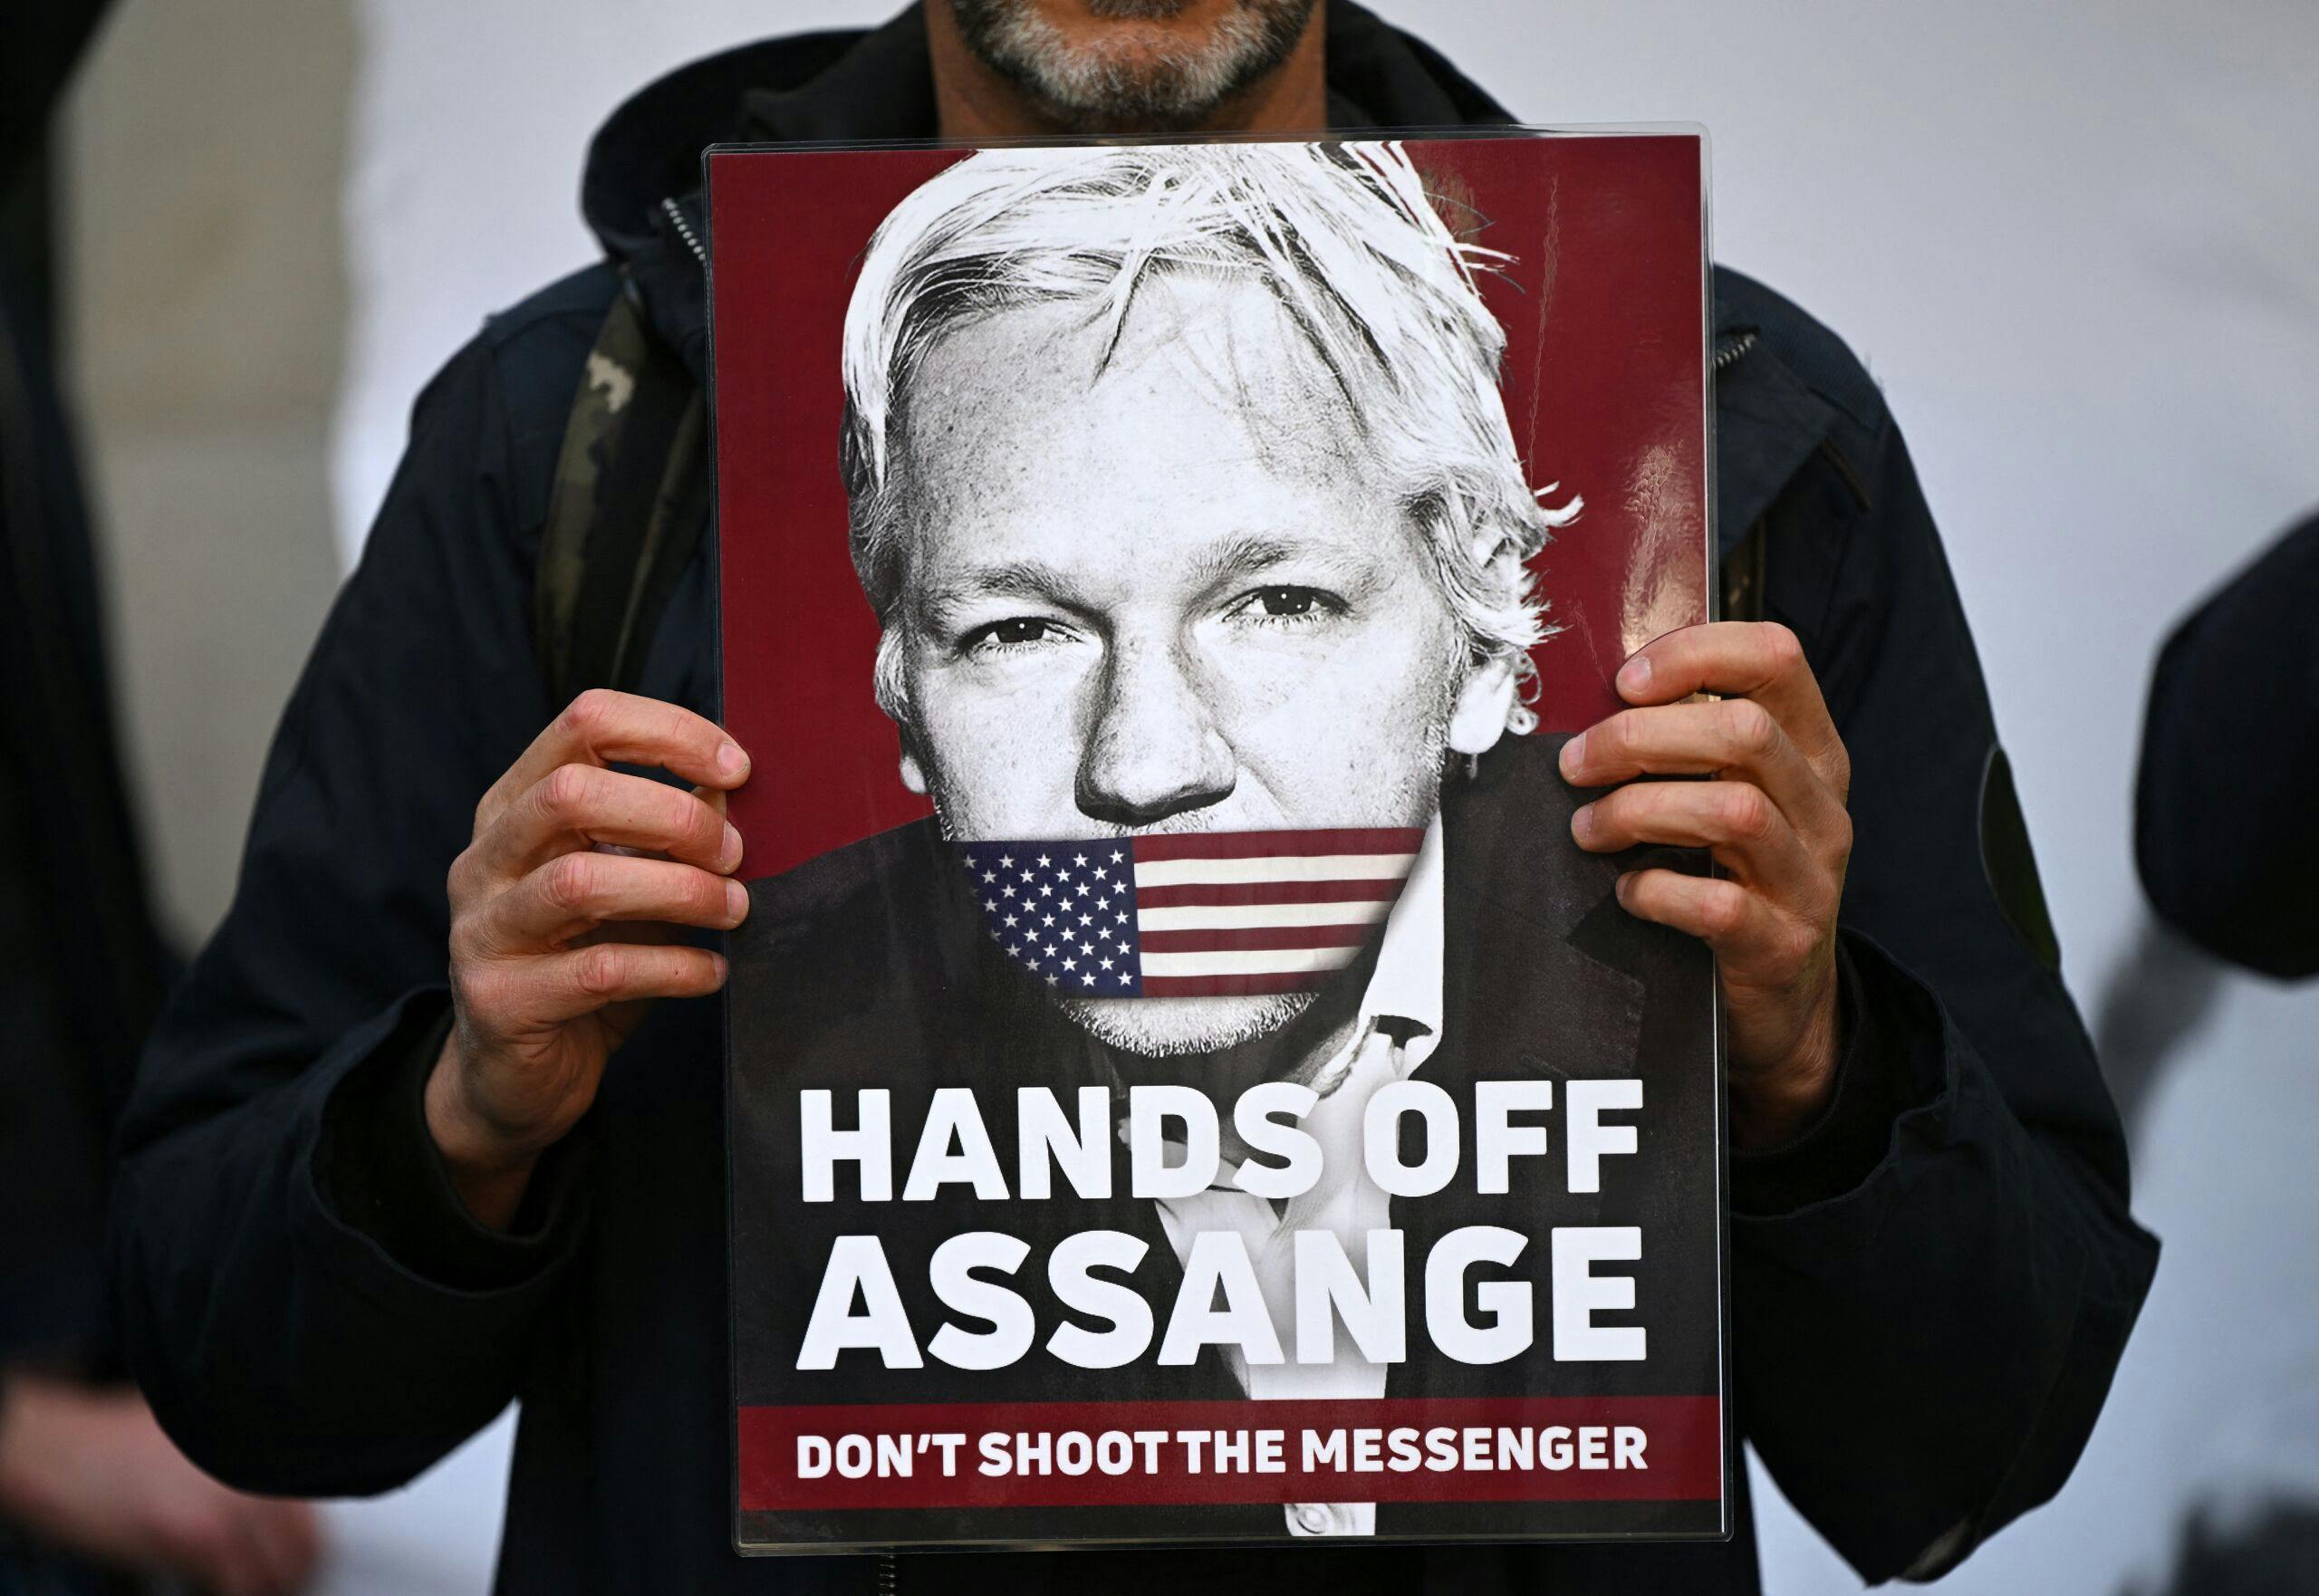 Julian Assange to be extradited to US